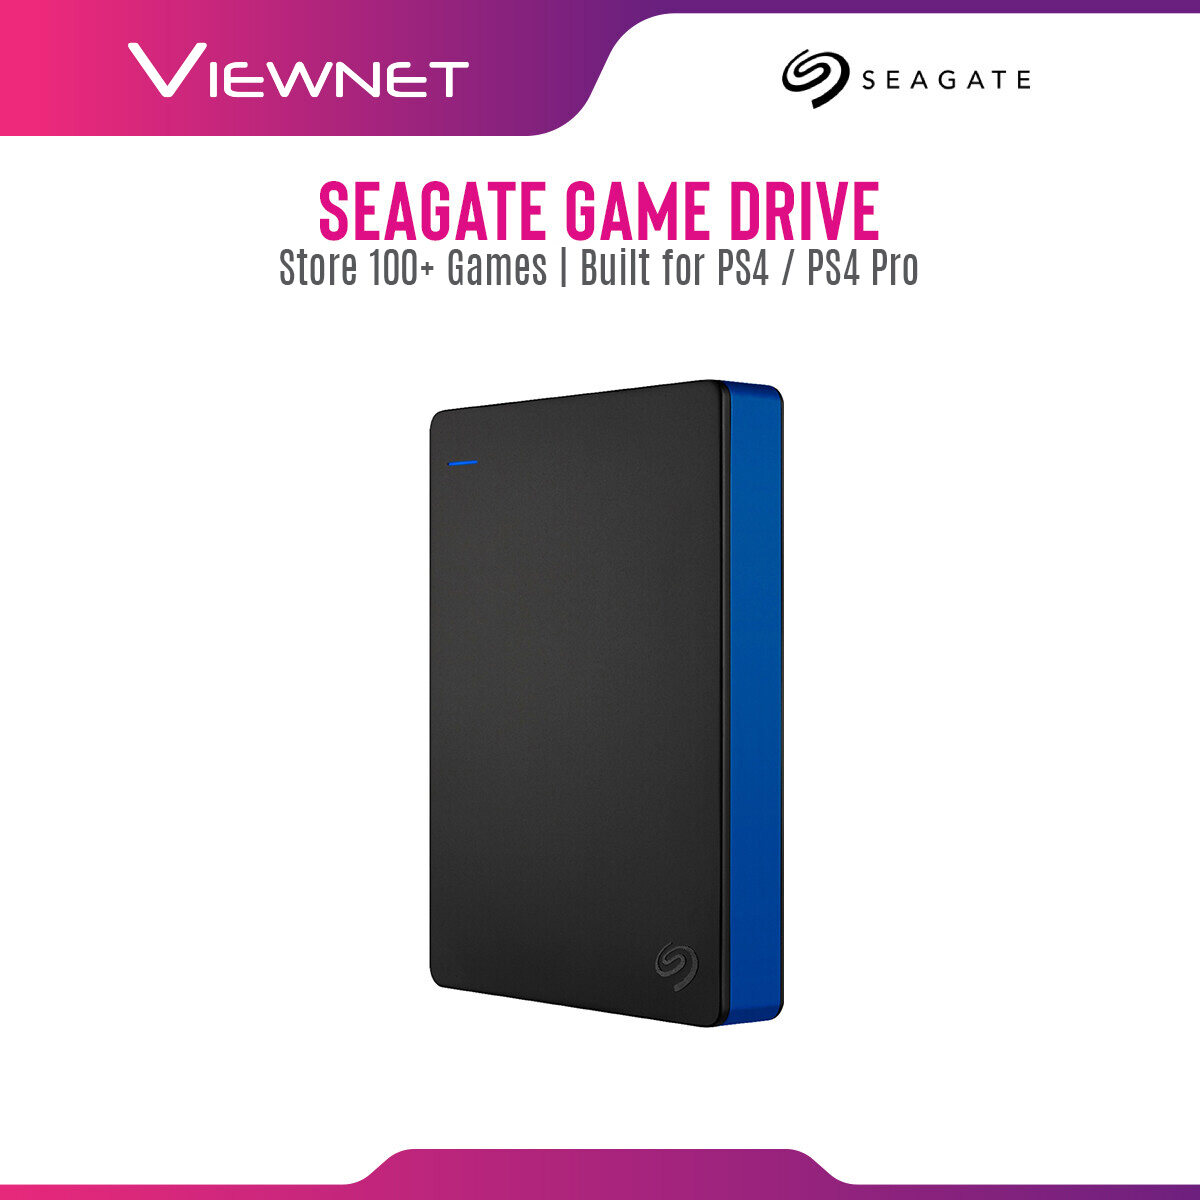 Seagate Game Drive 2TB / 4TB For PS4 / PS4 Pro with USB 3.0 Connection, Quick Setup, Store Up To 50+ Game